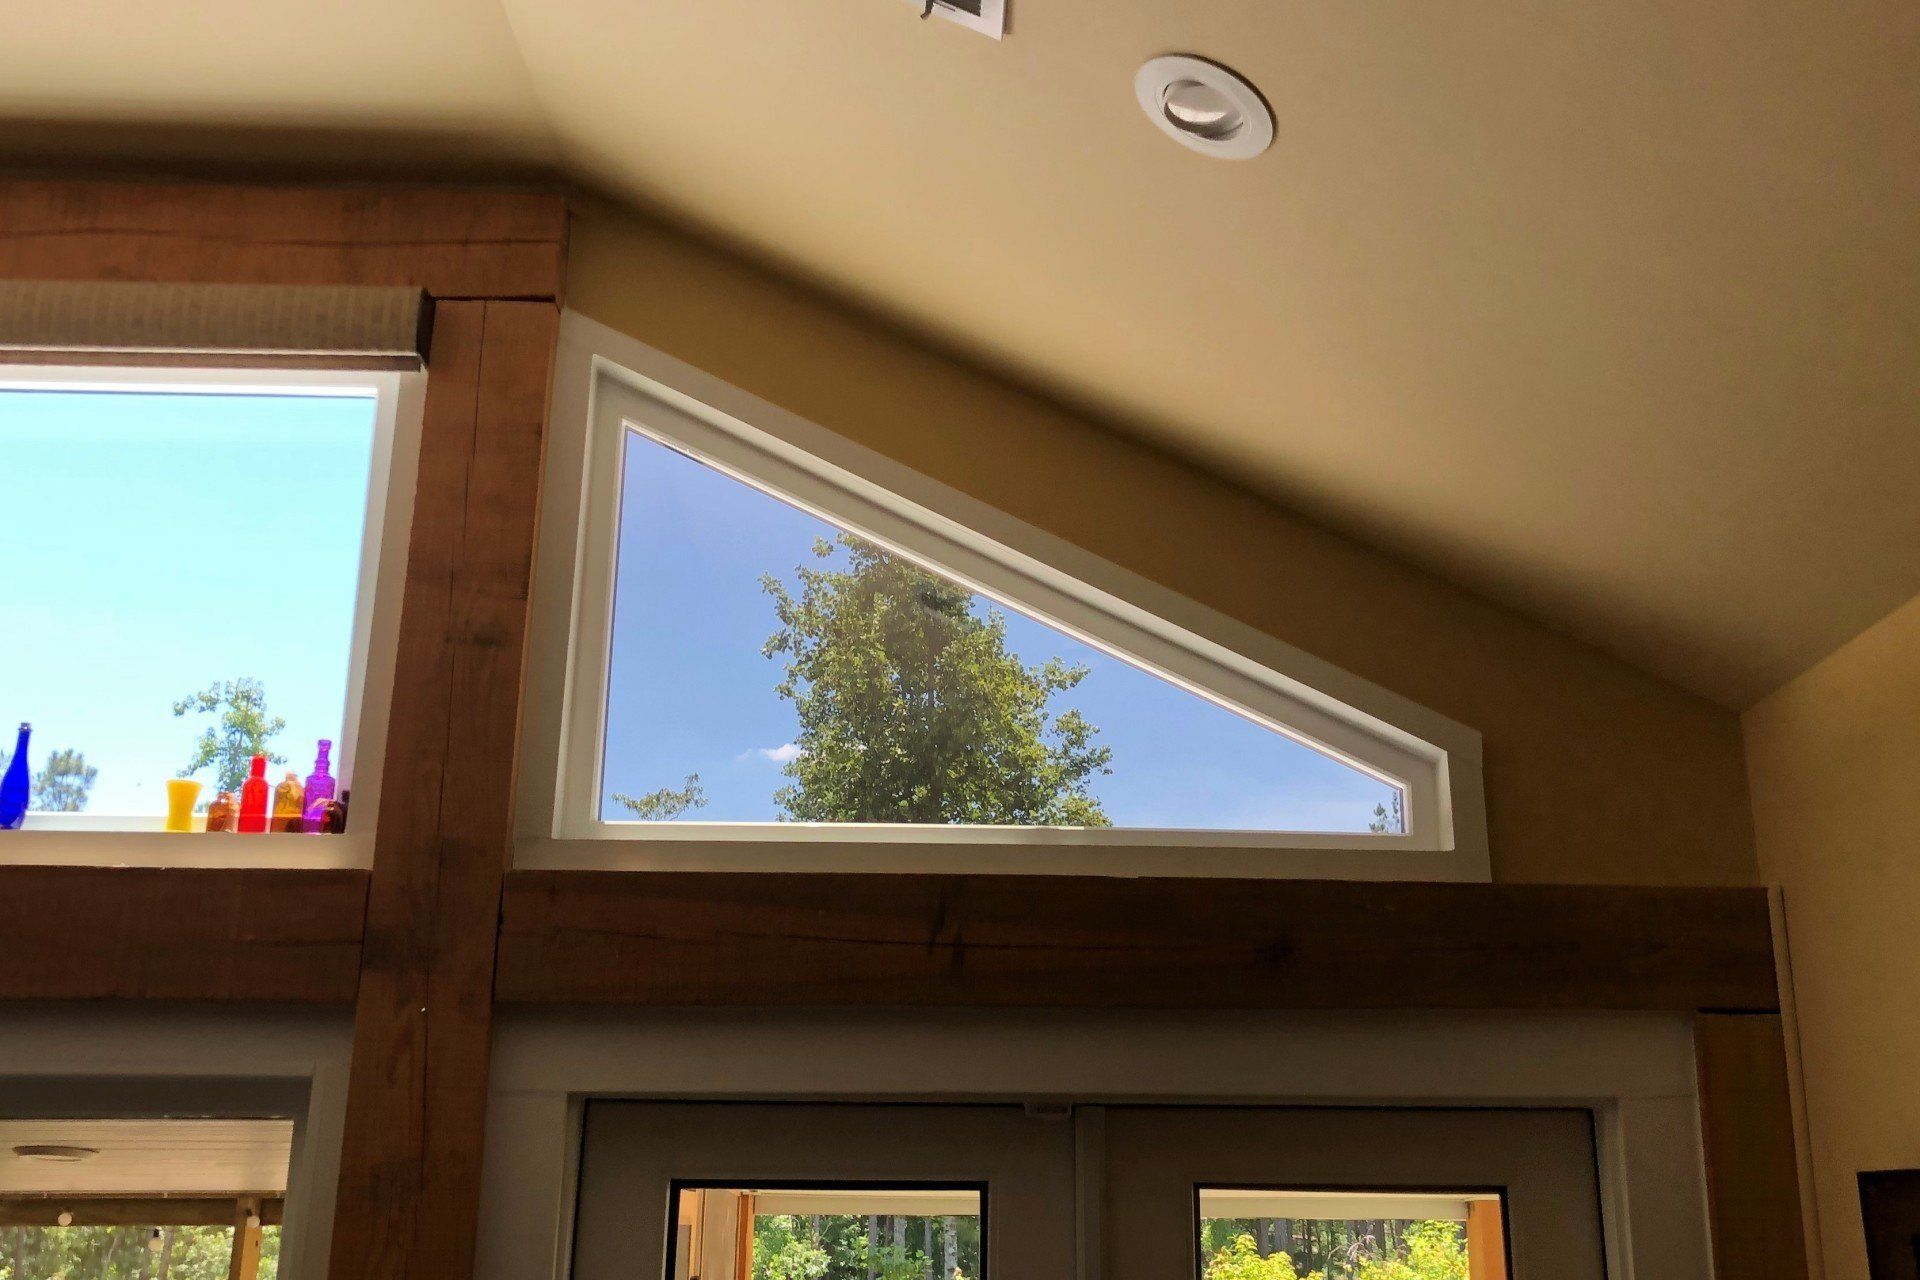 Professional Architectural home tint installation on 6.14.2019 - Bright Sun Glare Reduced after residential tint installed in Kellyton, AL